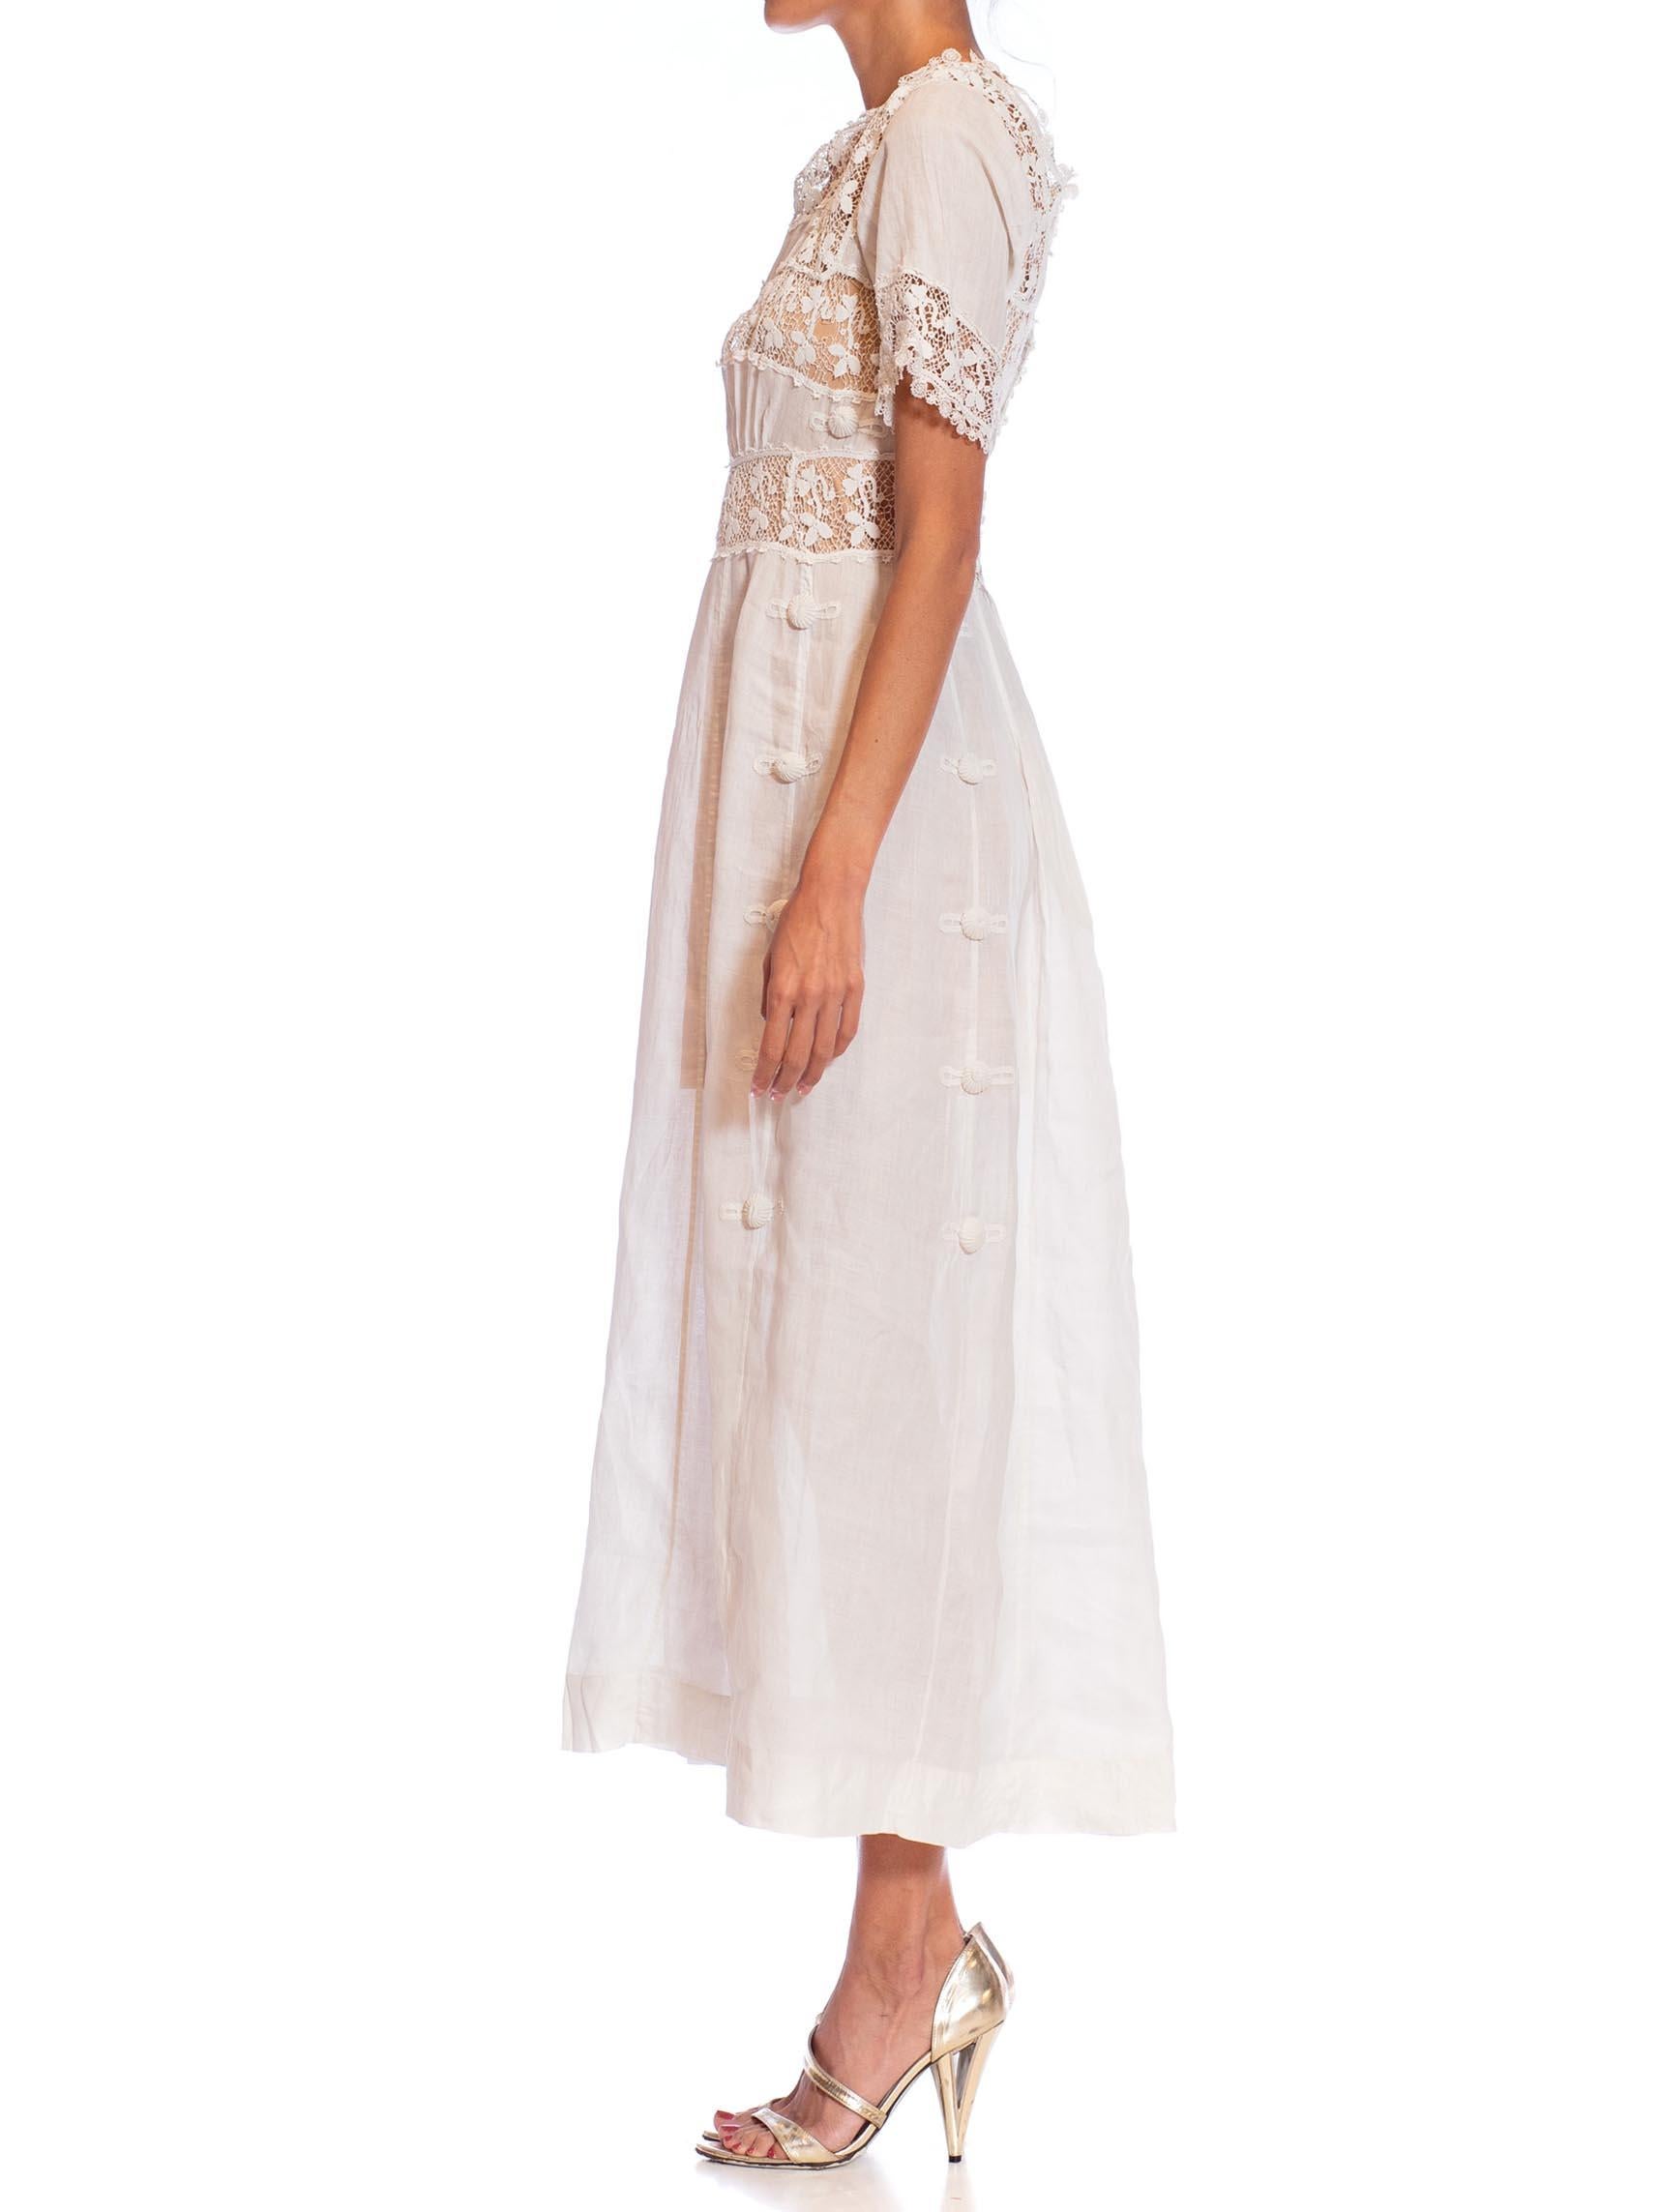 Edwardian White Linen & Lace Tea Dress With Sleeves For Sale 2